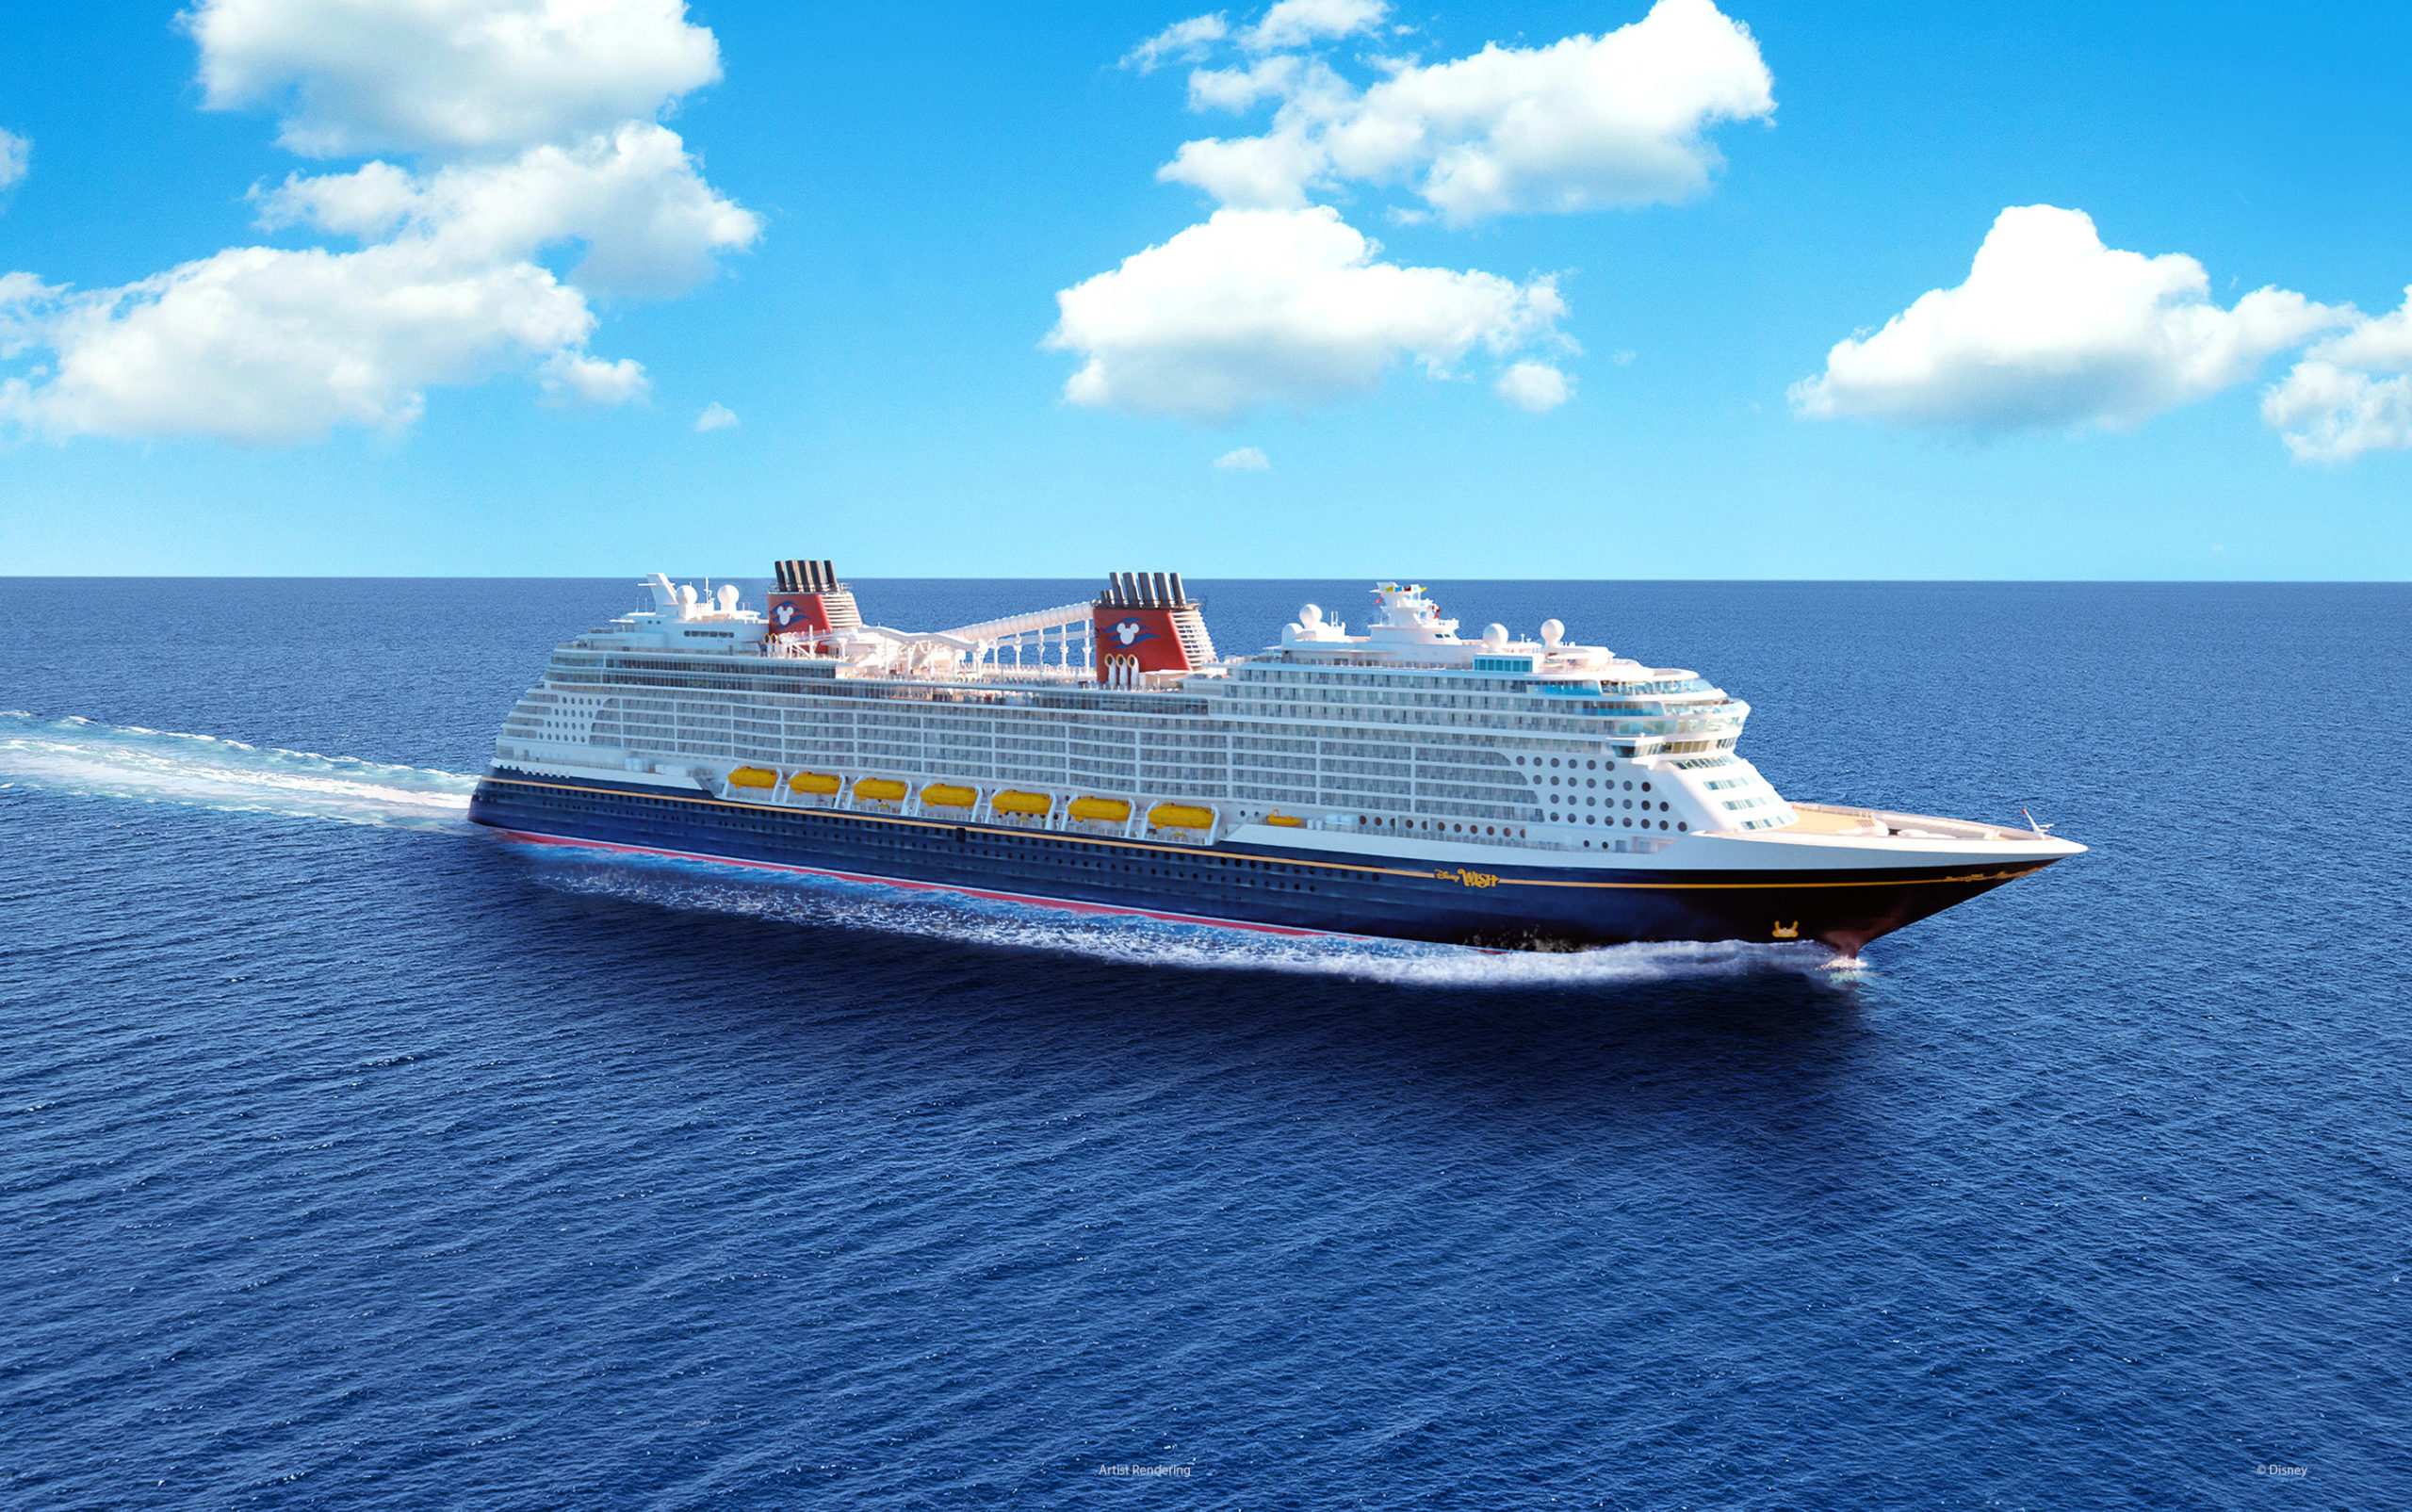 Everything you need to know about what's onboard the Disney Wish cruise